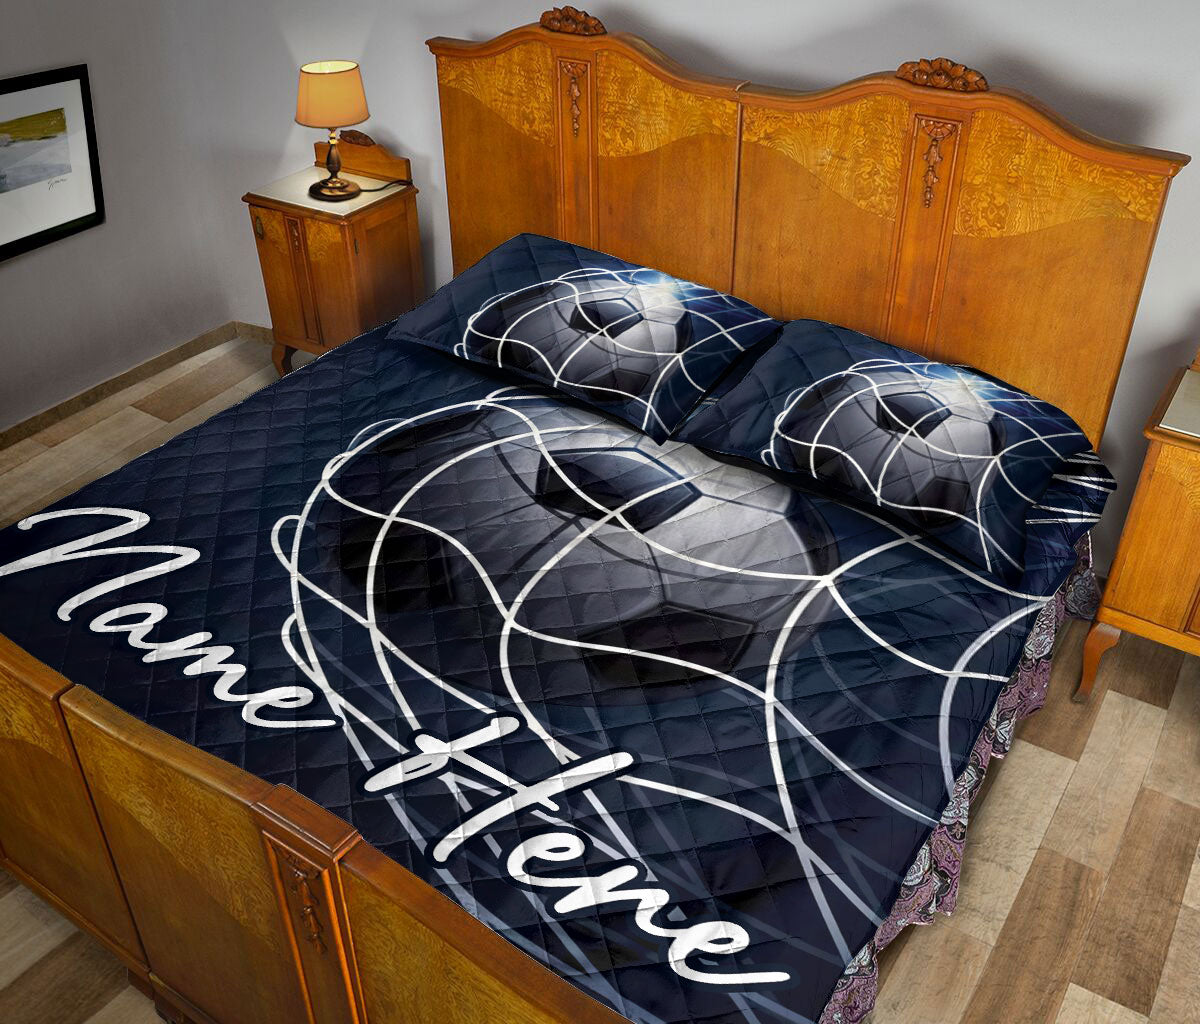 Ohaprints-Quilt-Bed-Set-Pillowcase-Soccer-Goal-Navy-Net-Sports-Lovers-Fan-Unique-Gift-Custom-Personalized-Name-Blanket-Bedspread-Bedding-651-Queen (80'' x 90'')